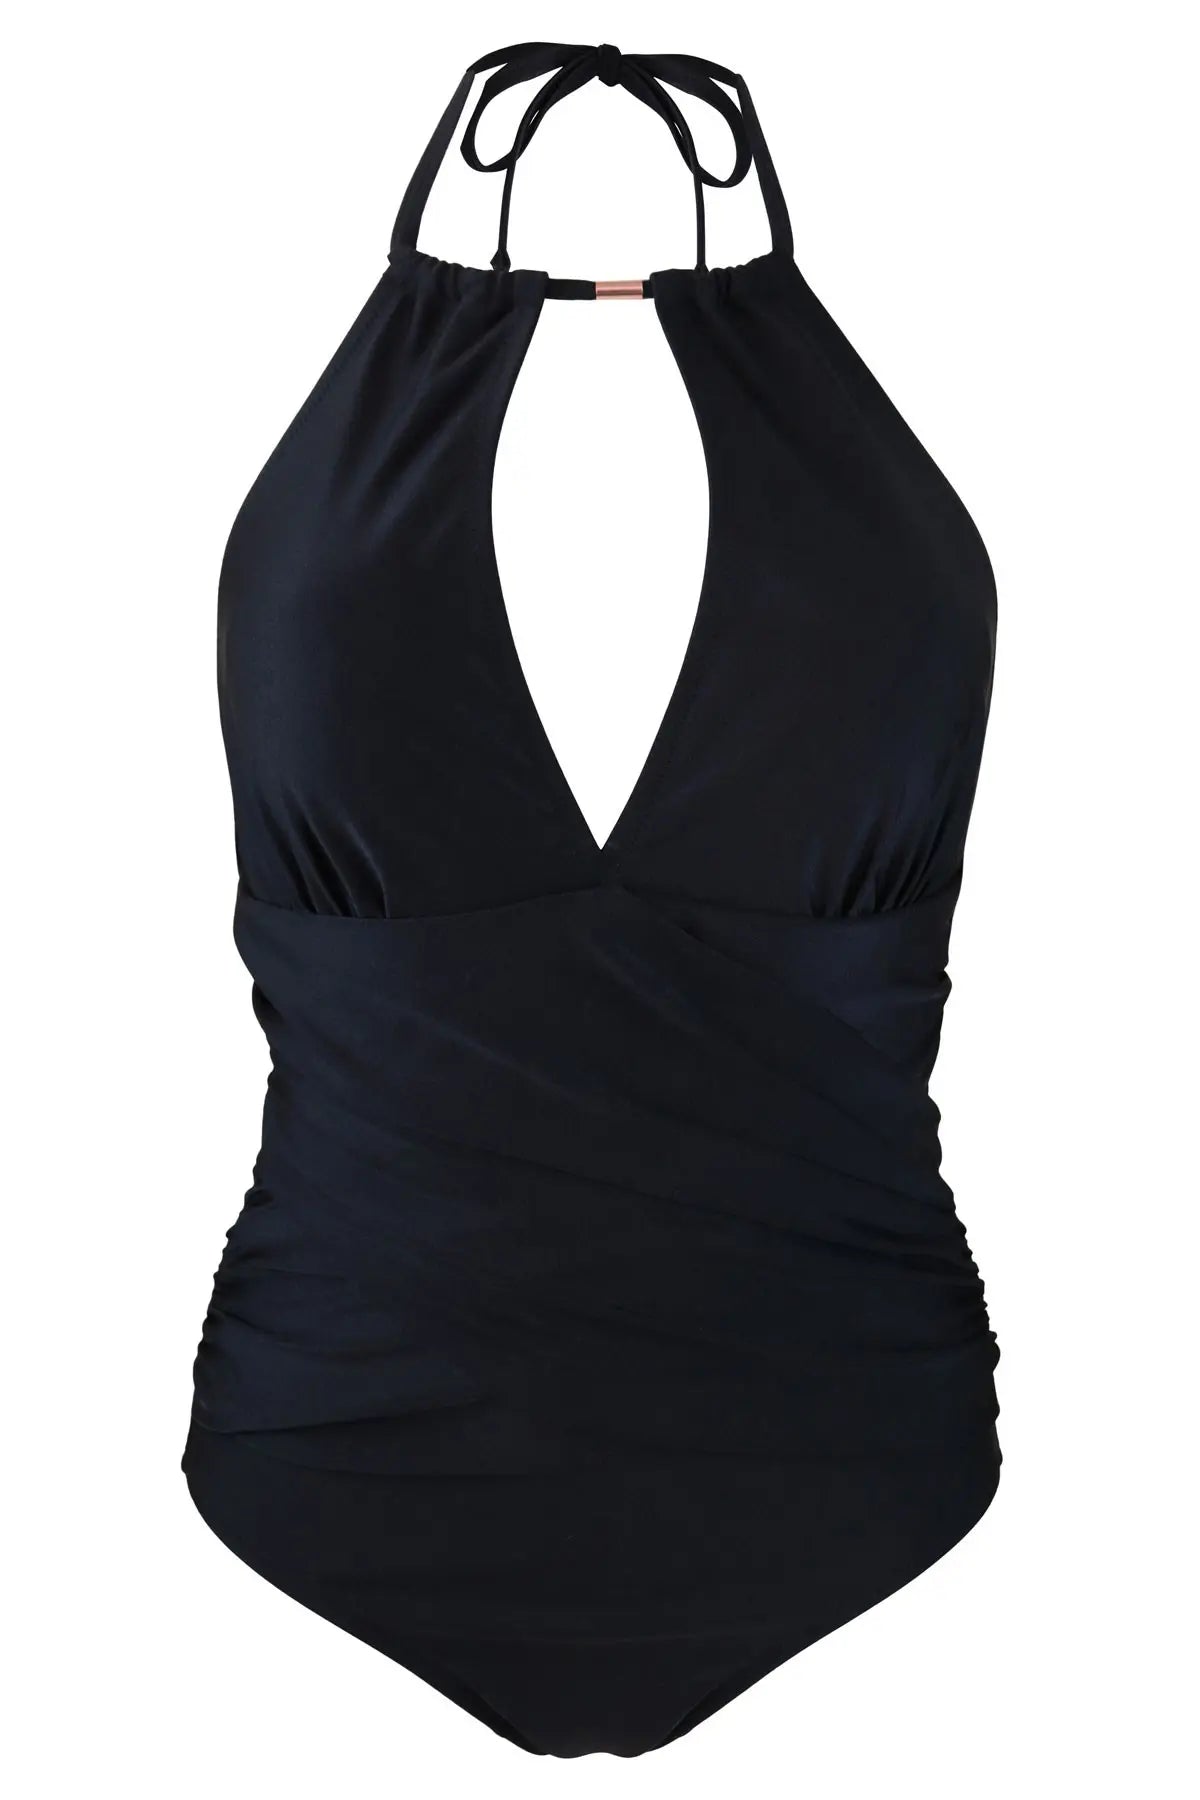 Ring Neck Control Swimsuit In Black - Pour Moi